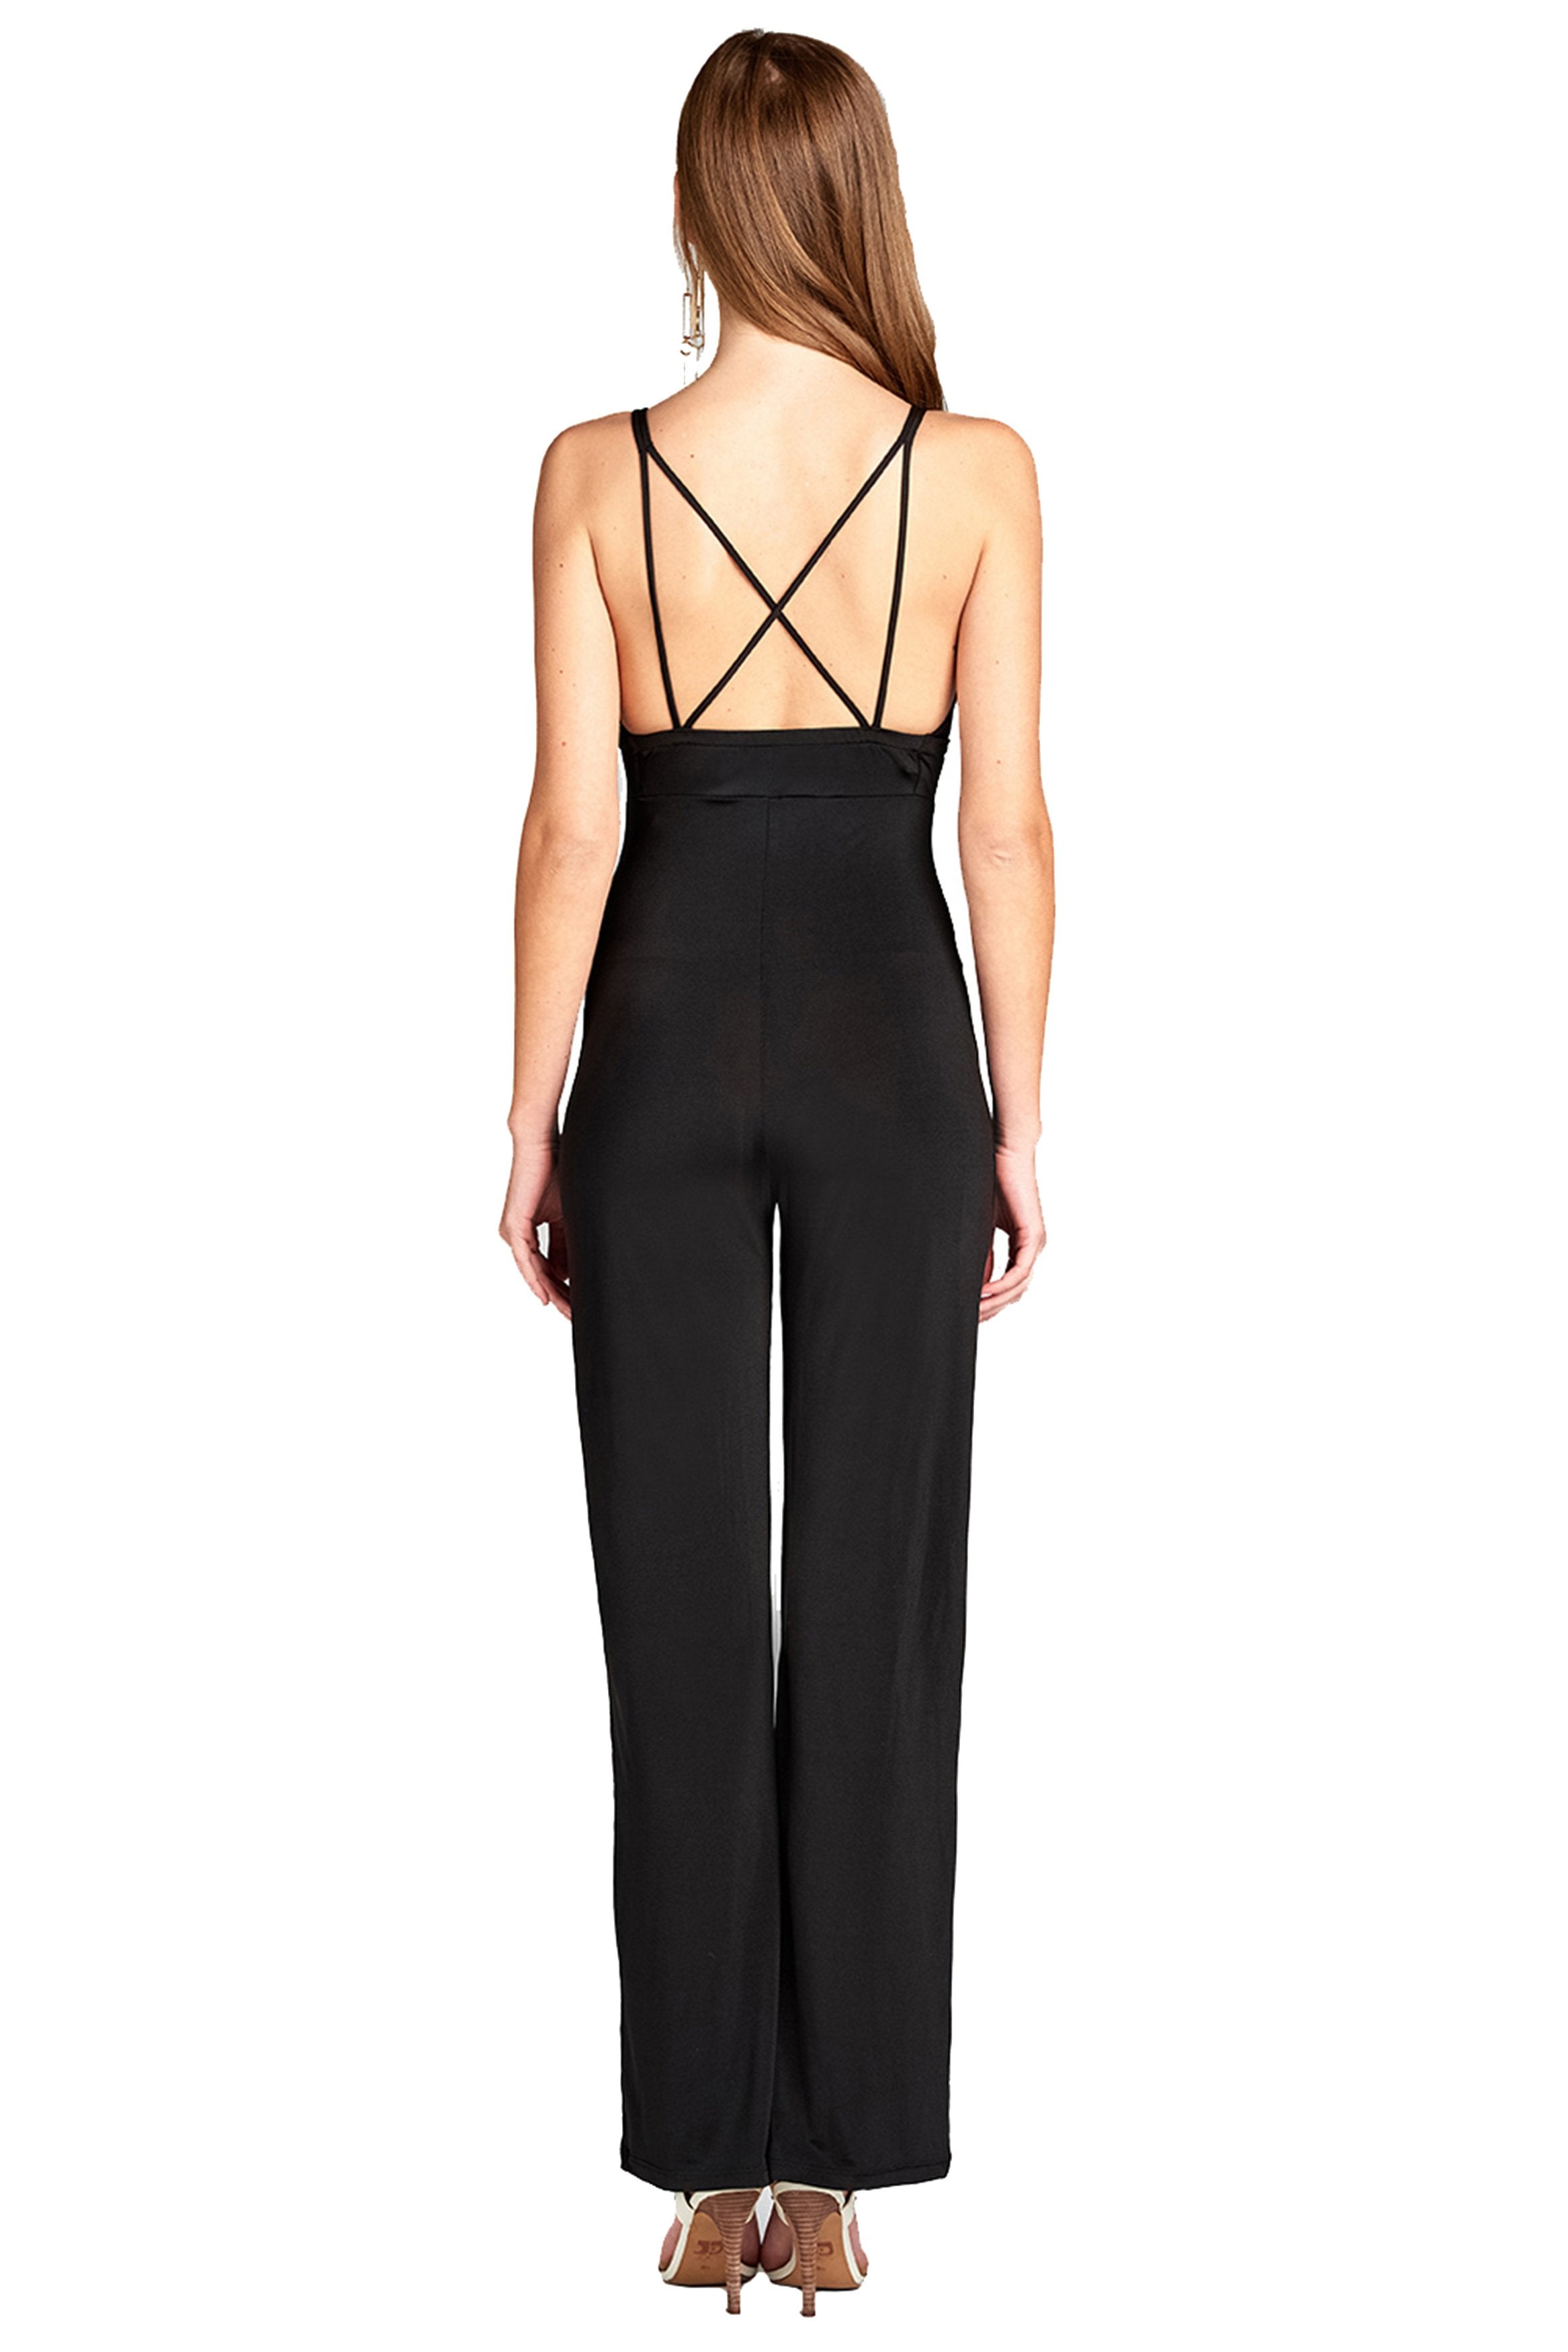 V Neck With Back Cross Strap Long Wide Palazzo Leg Stretchy Jumpsuit